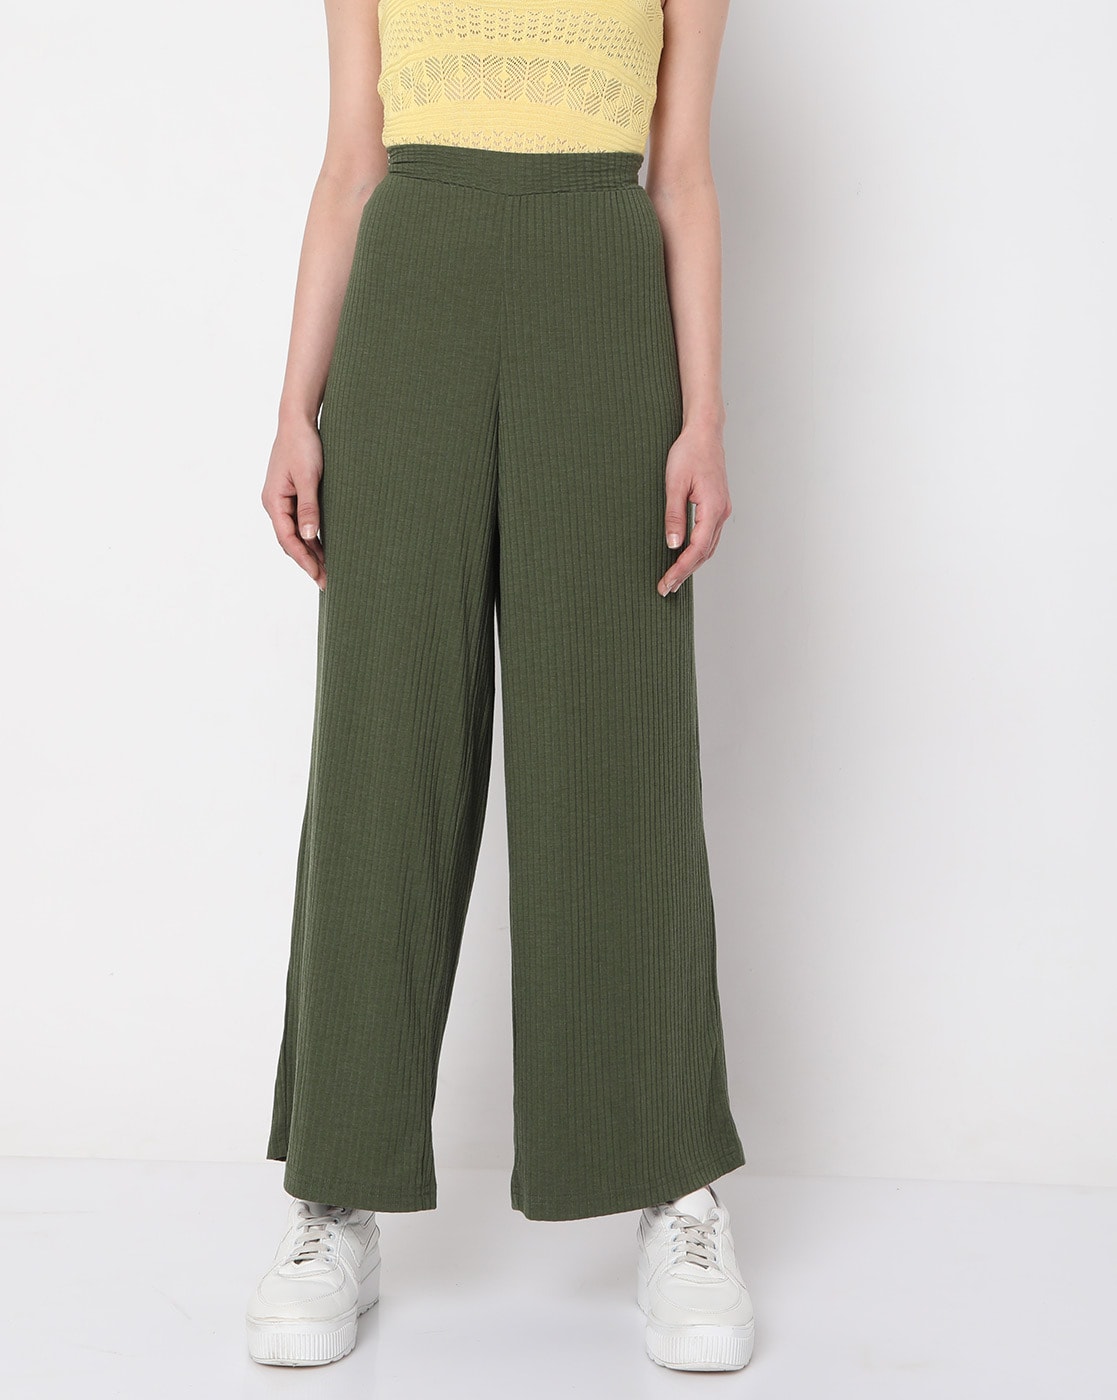 VERO MODA Formal Trousers outlet  Women  1800 products on sale   FASHIOLAcouk